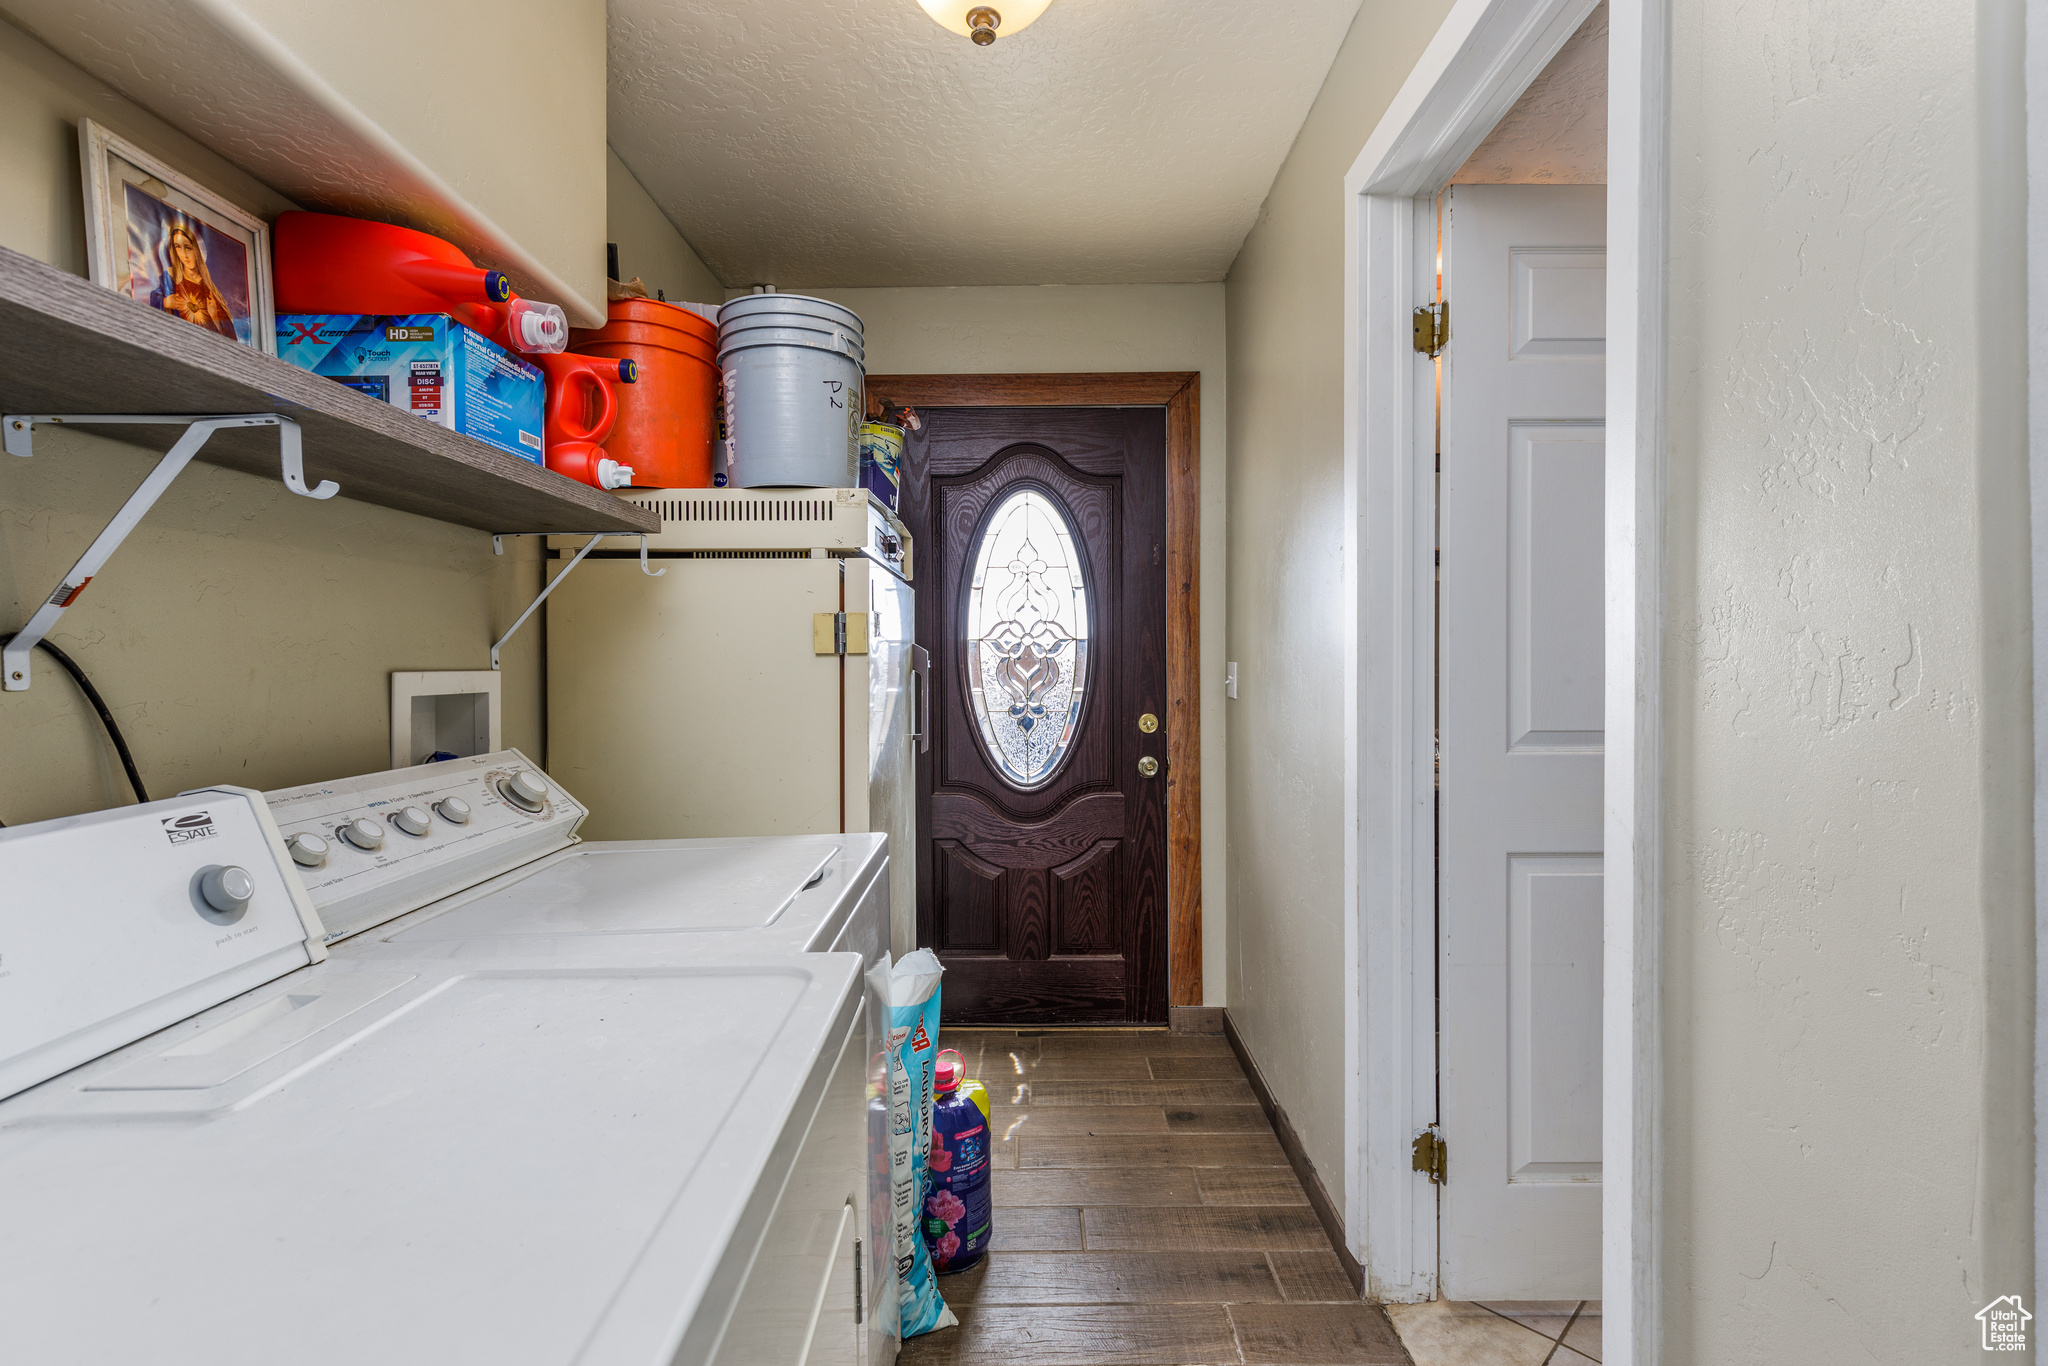 Laundry area with independent washer and dryer, dark hardwood / wood-style flooring, hookup for a washing machine, and a textured ceiling